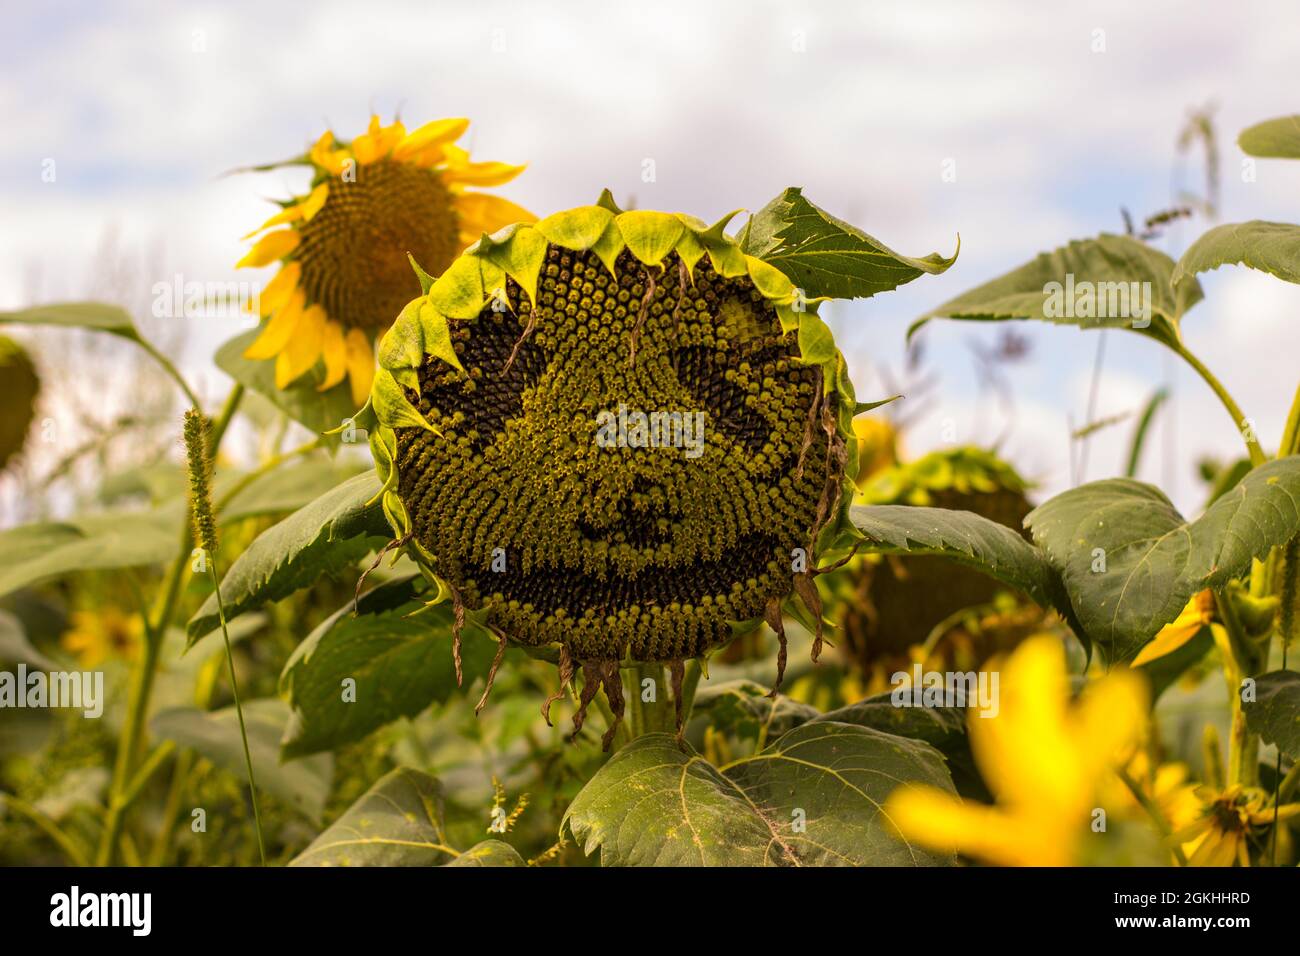 Field with sunflowers. Sunflower with face. Sky with clouds illuminated by the sun. Stock Photo